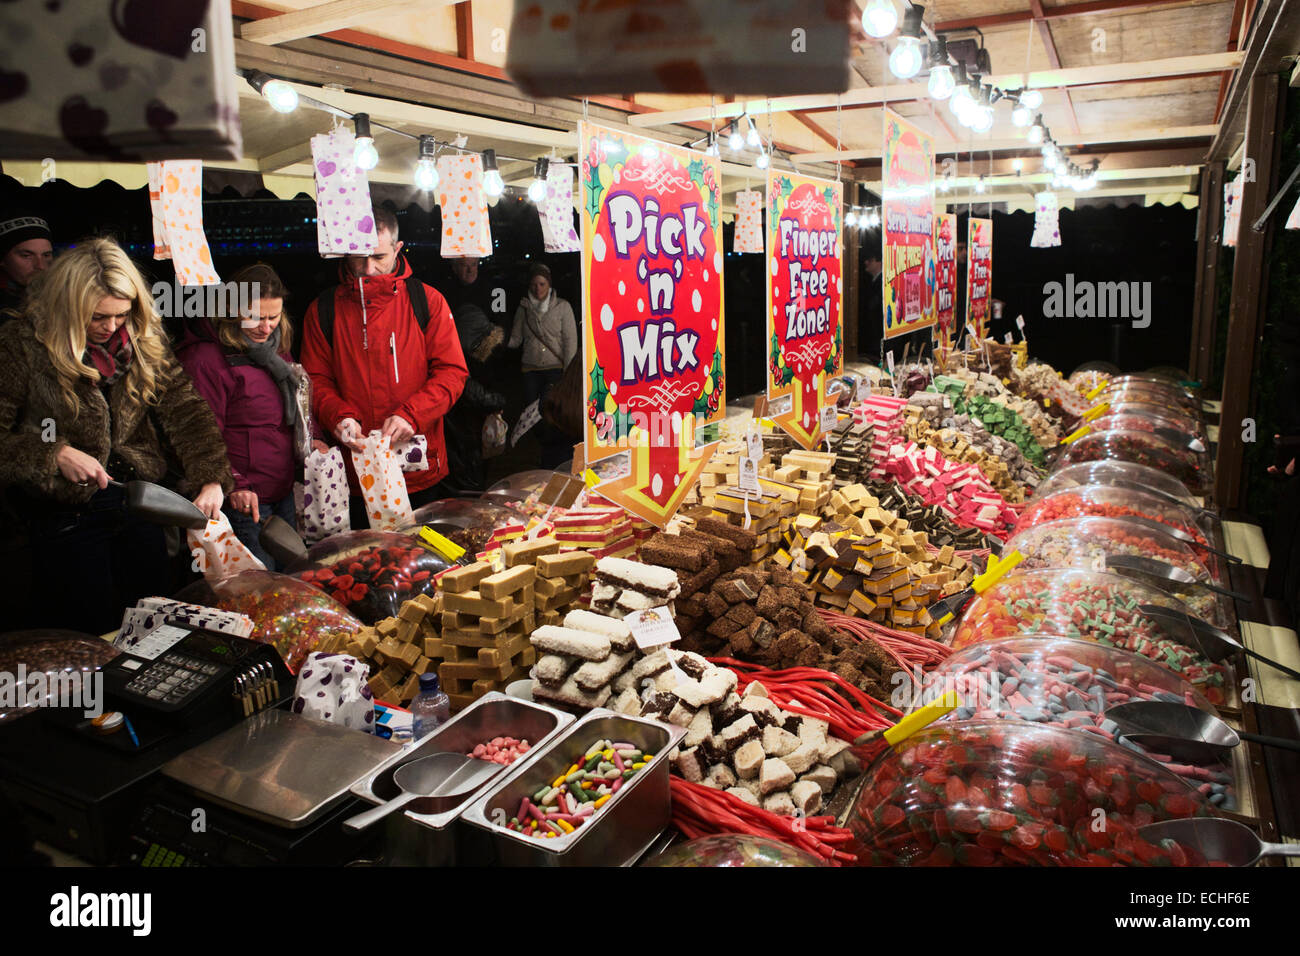 Pick and mix stall, customers selecting pick n mix sweets, London UK. Stock Photo